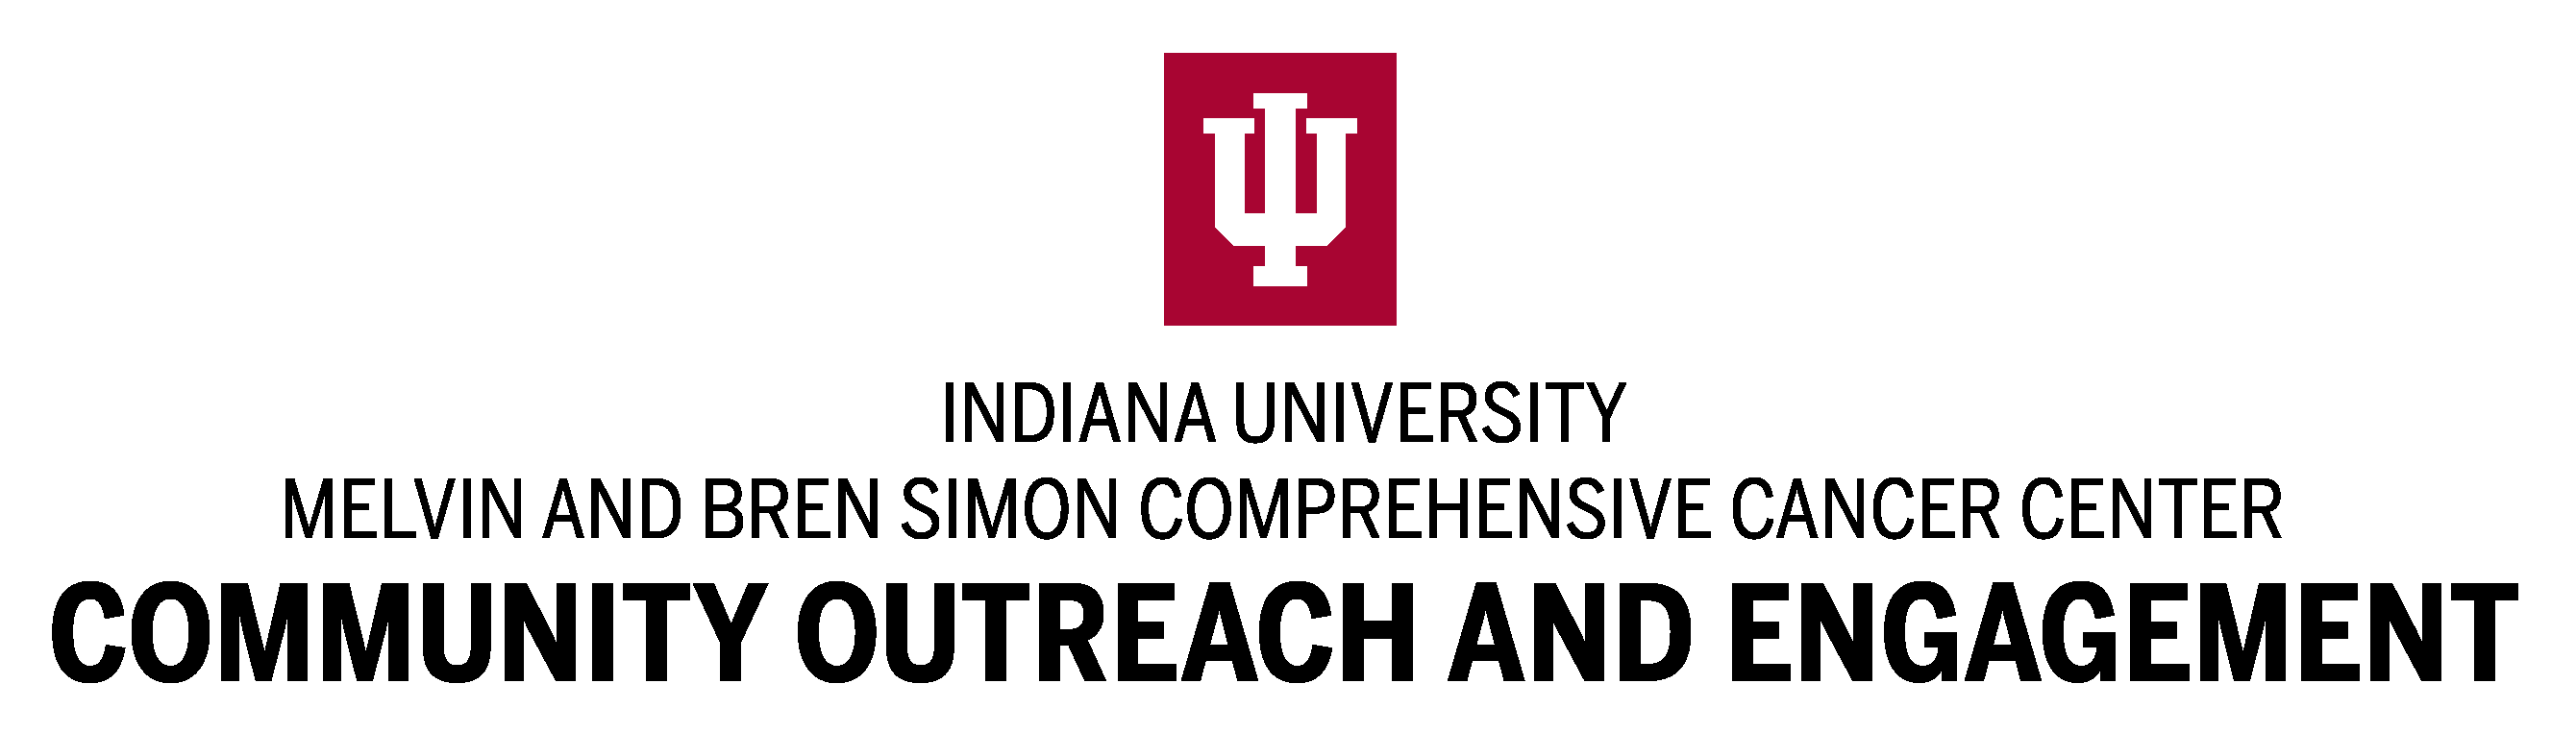 Gold Sponsor 3 - Indiana University Melvin and Bren Simon Comprehensive Cancer Center Community Outreach and Engagement